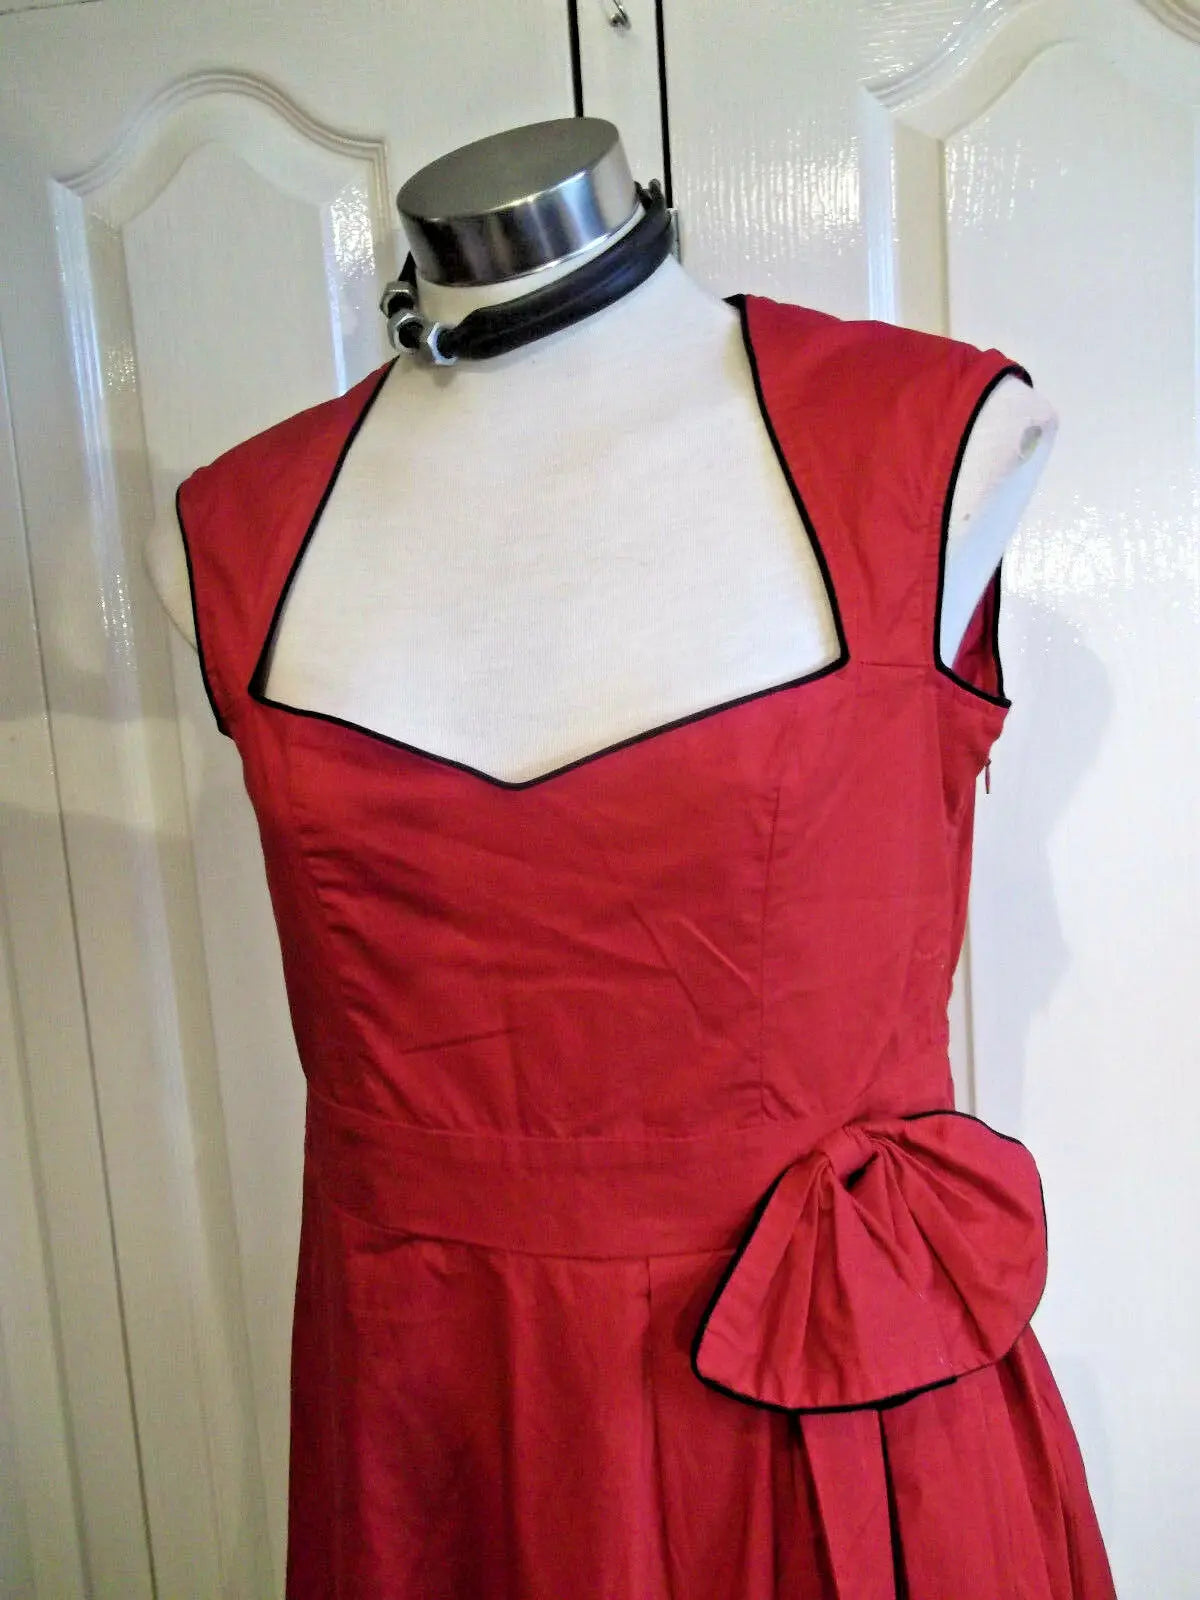 Stunning Lindy Bop 50s Red Swing Dress with Black trim, Size 12 Lindy Bop